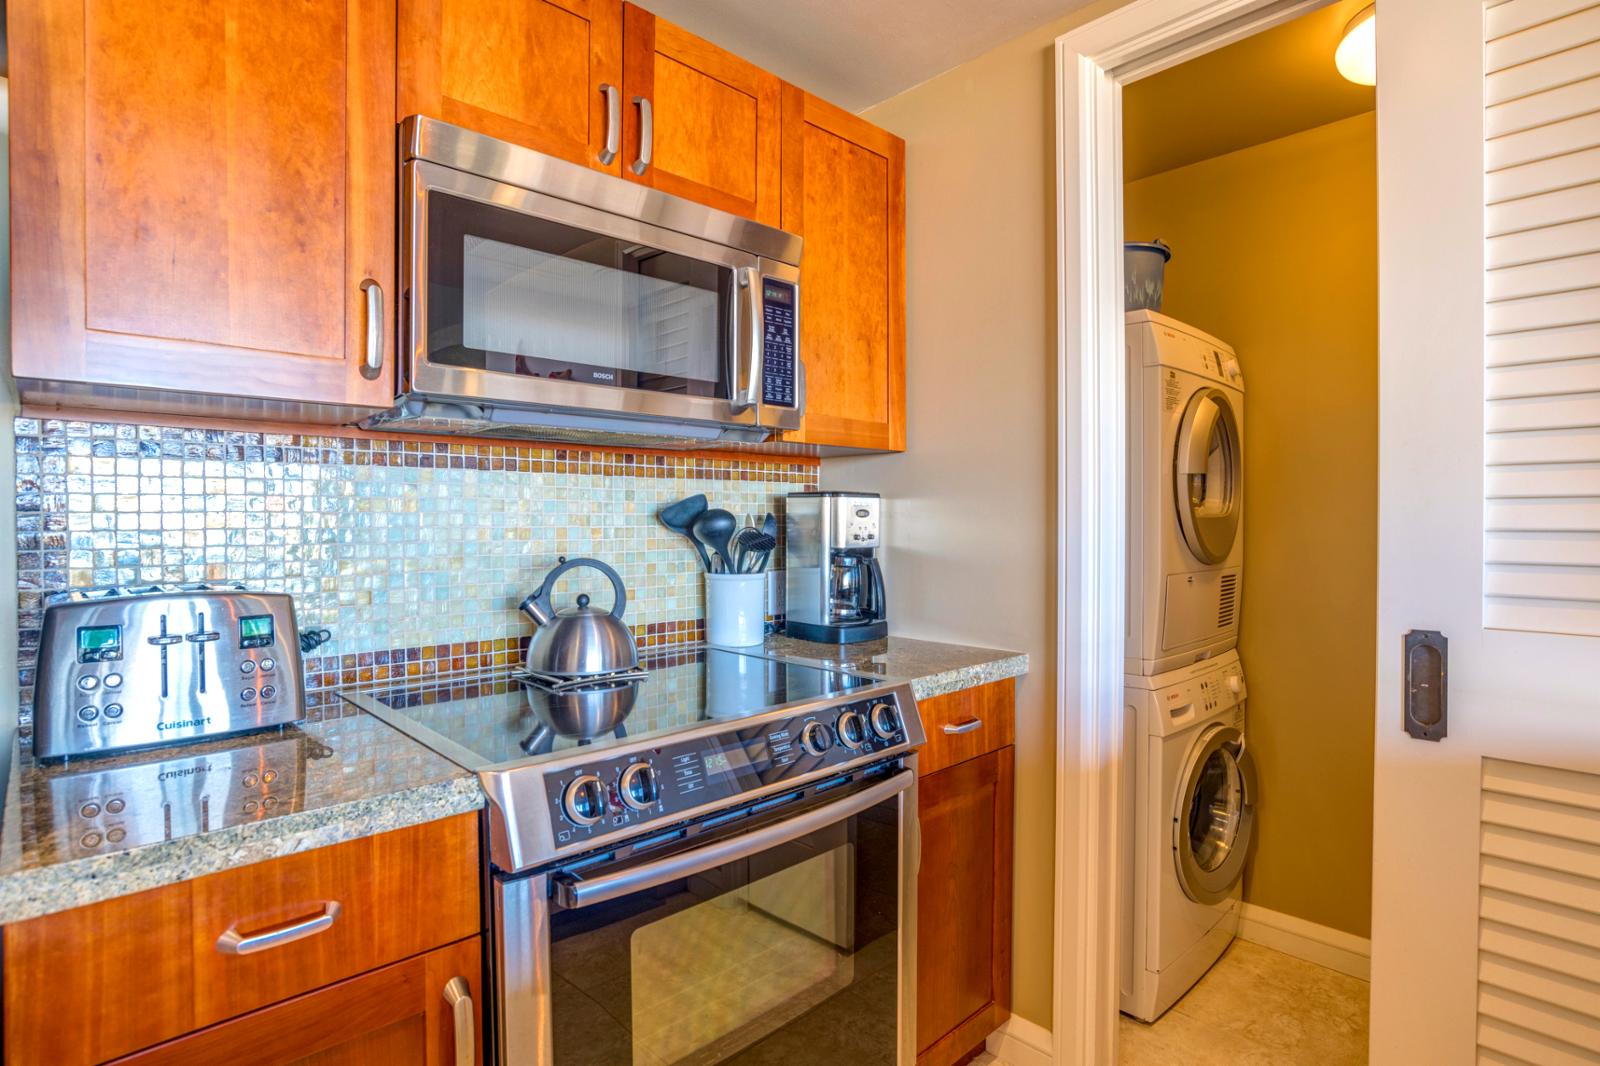 Stainless steel appliances throughout